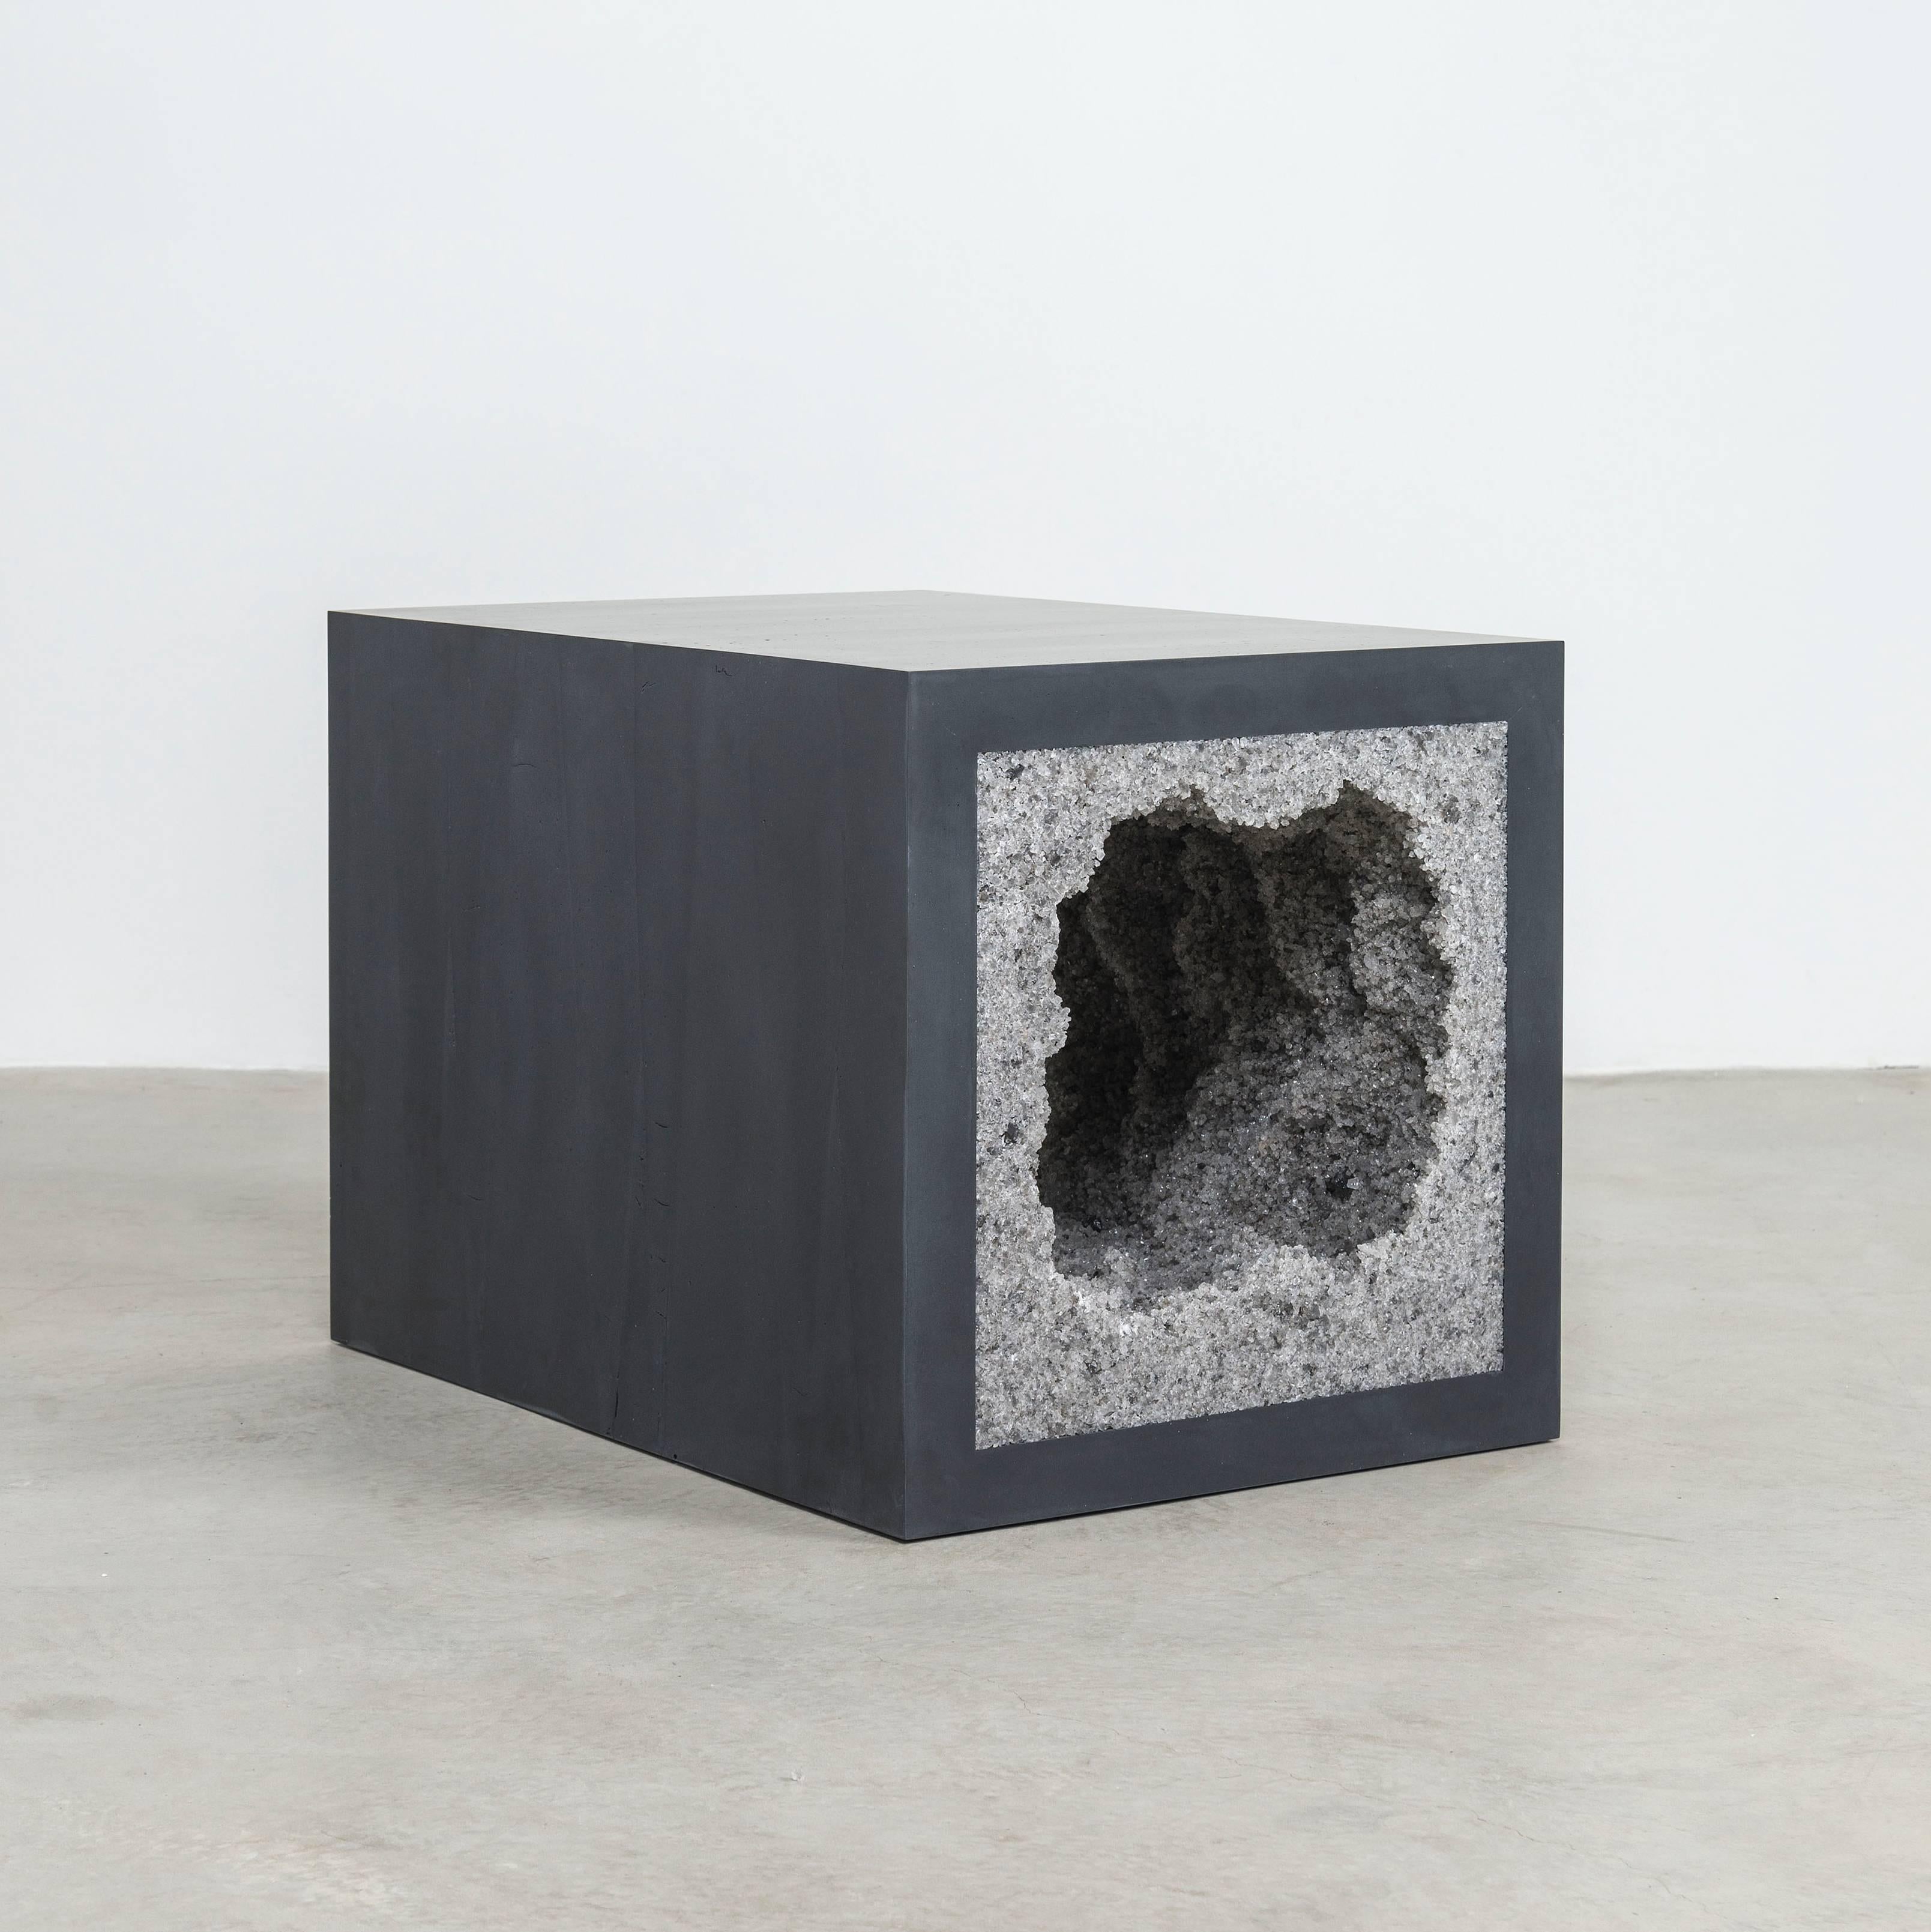 Composed from a combination of materials, the angular side table consists of a hand-dyed cement exterior and a grey rock salt interior. Packed by hand within the smooth ombre of black cement, the granules form an organic texture to contrast the